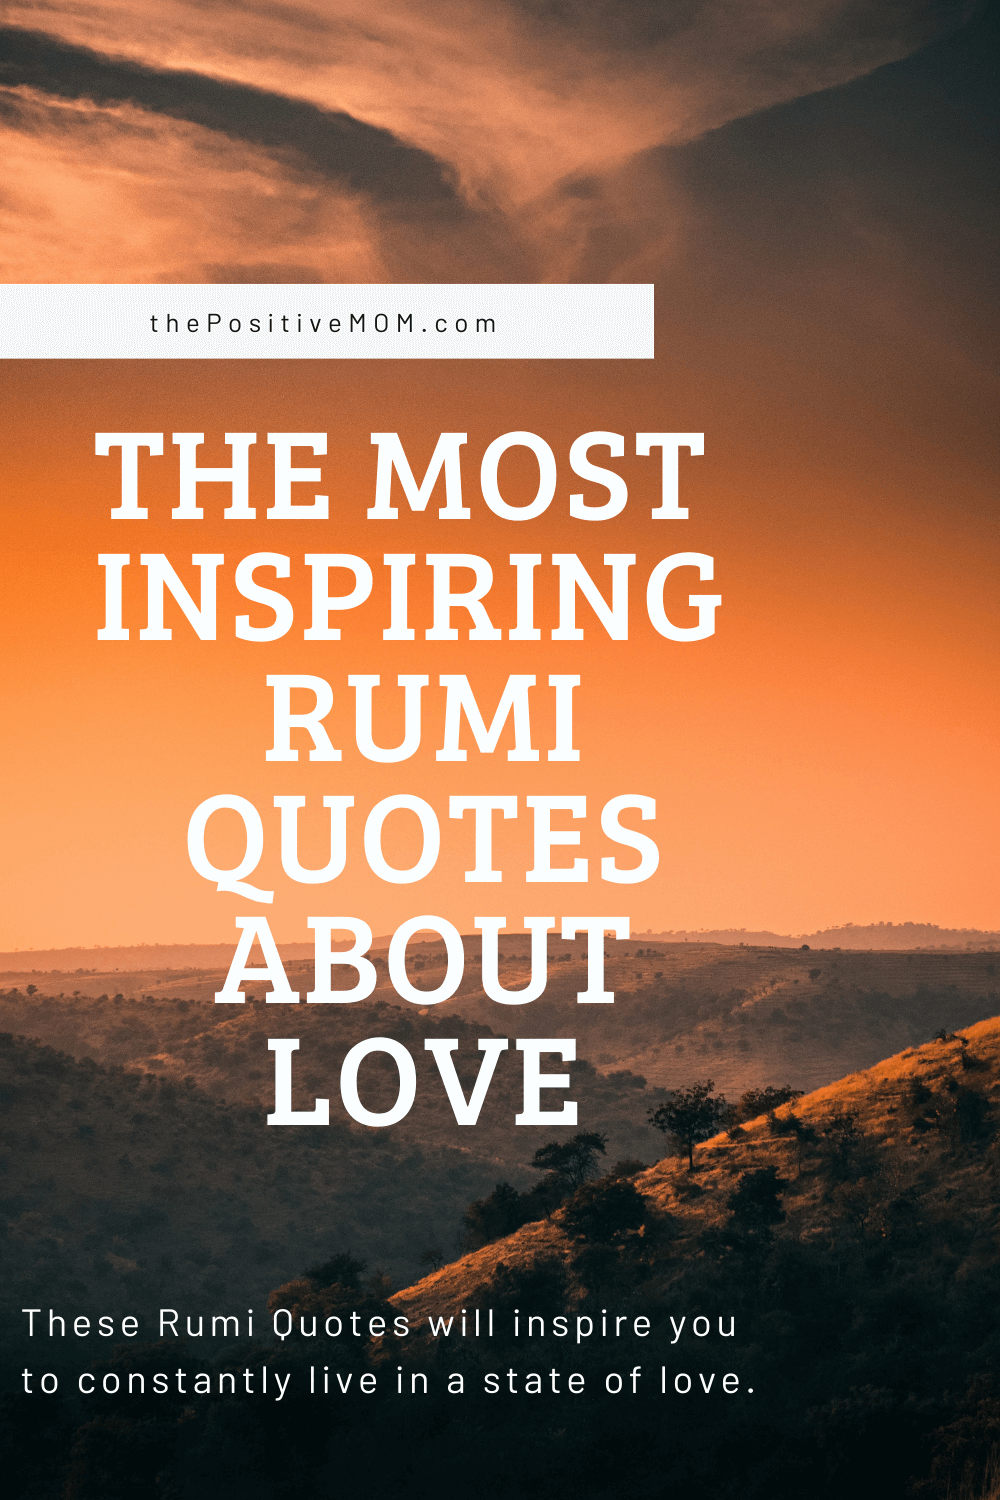 The Most Inspiring Rumi Quotes About Love and Loving (2023)